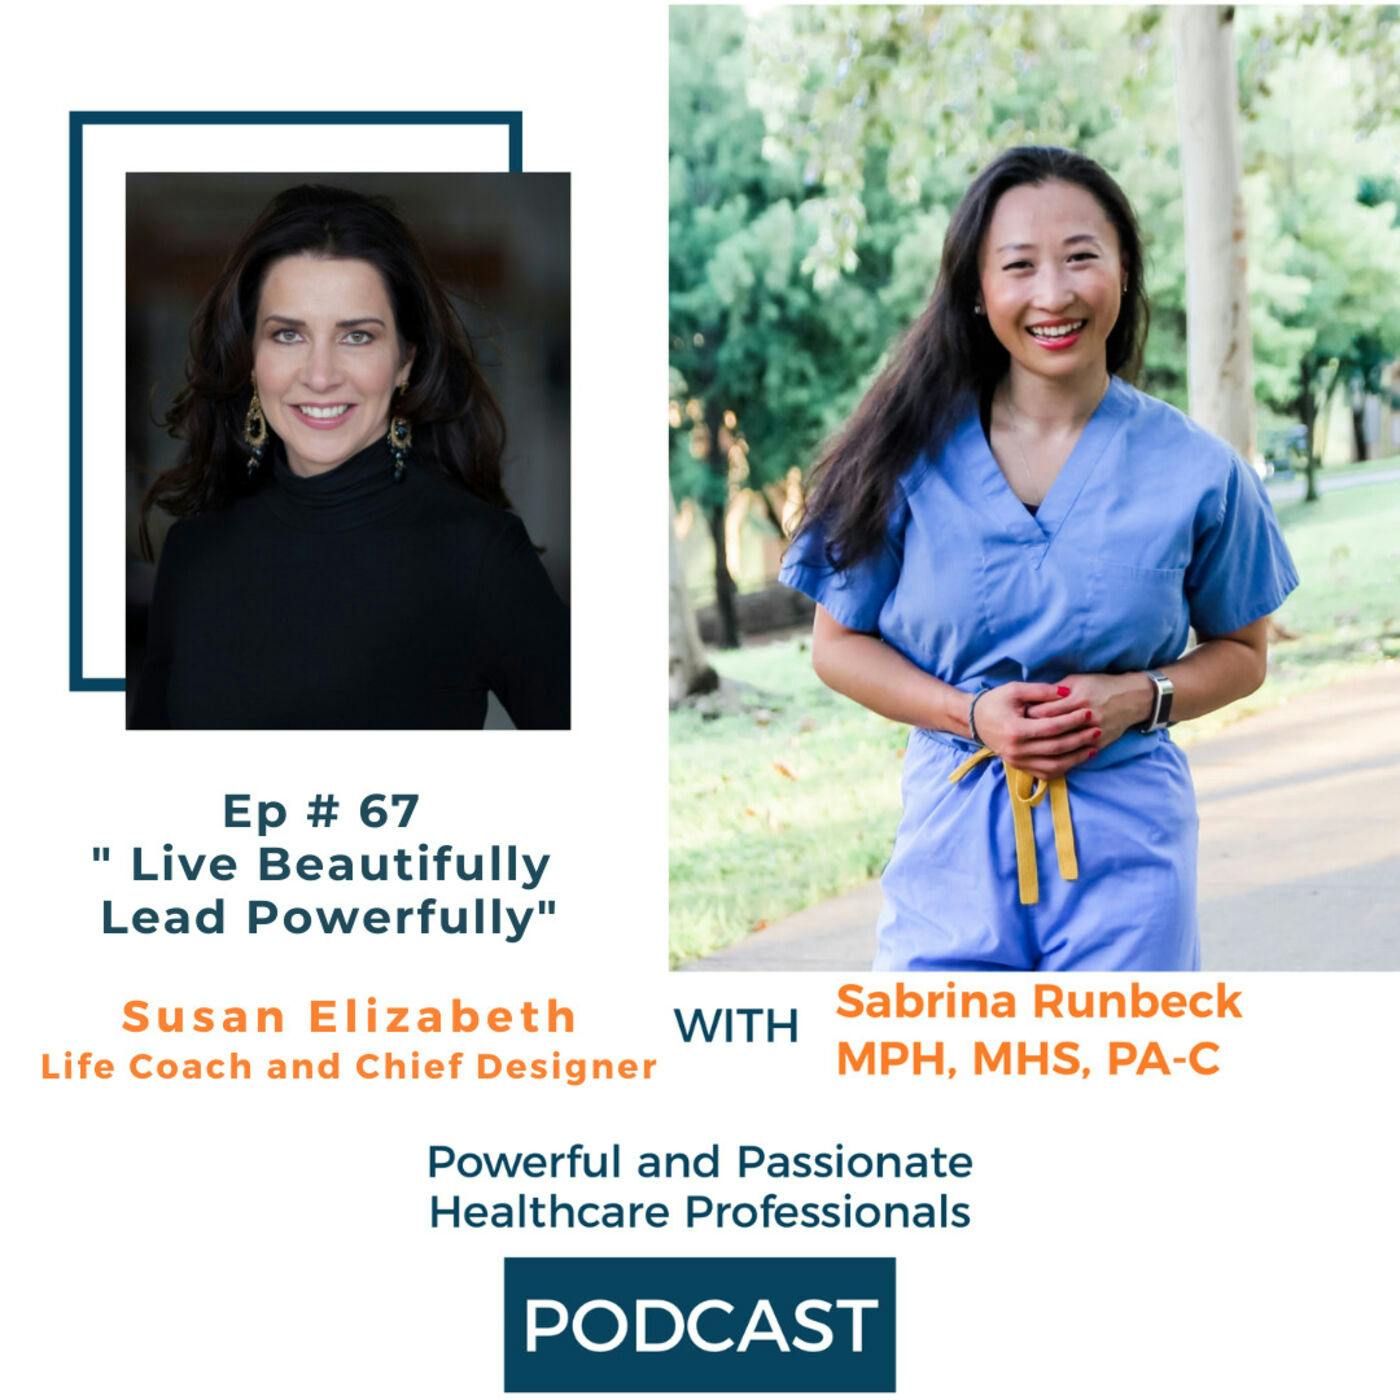 Ep 67 – Live Beautifully Lead Powerfully with Susan Elizabeth